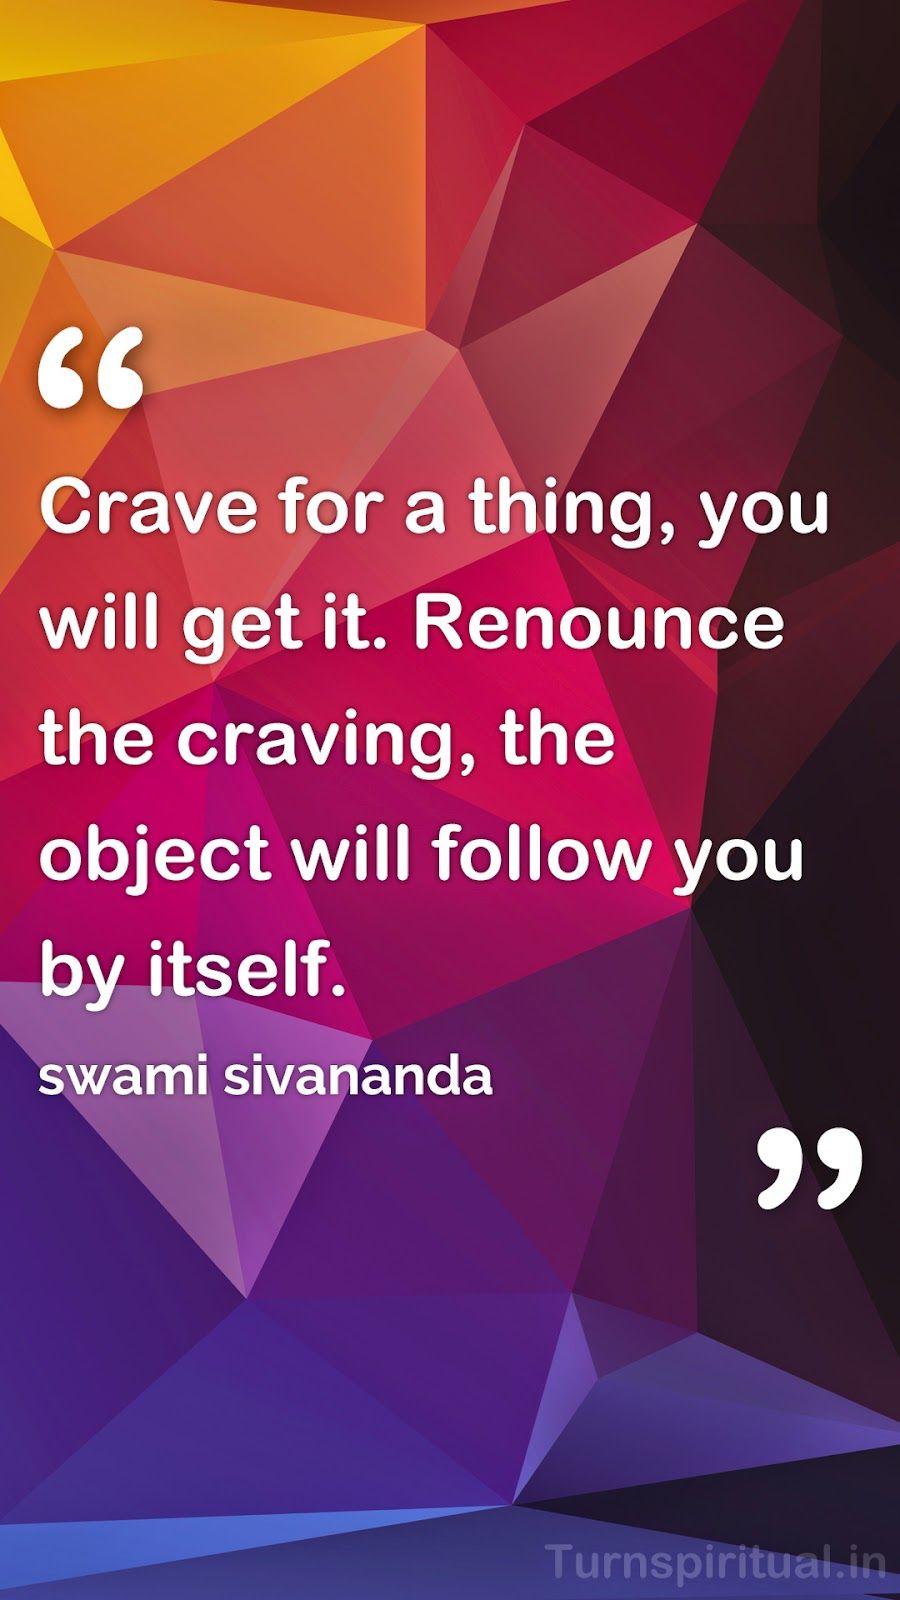 6 Lowpoly HD mobile wallpapers of Swami Sivananda Quotes - Free